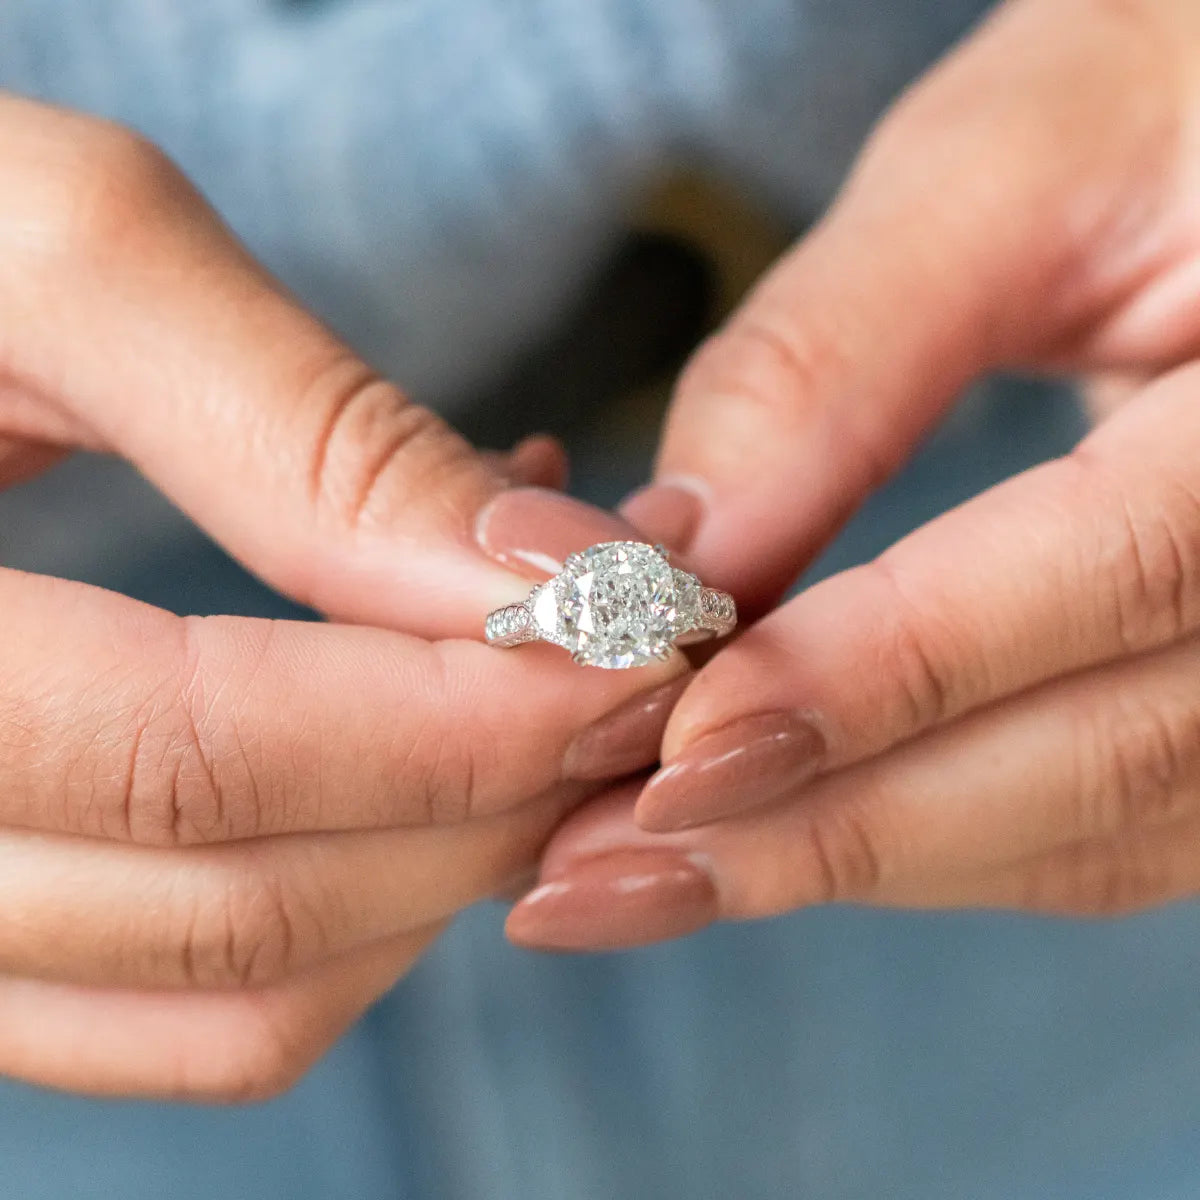 Platinum vs. White Gold - Which Metal to Choose?